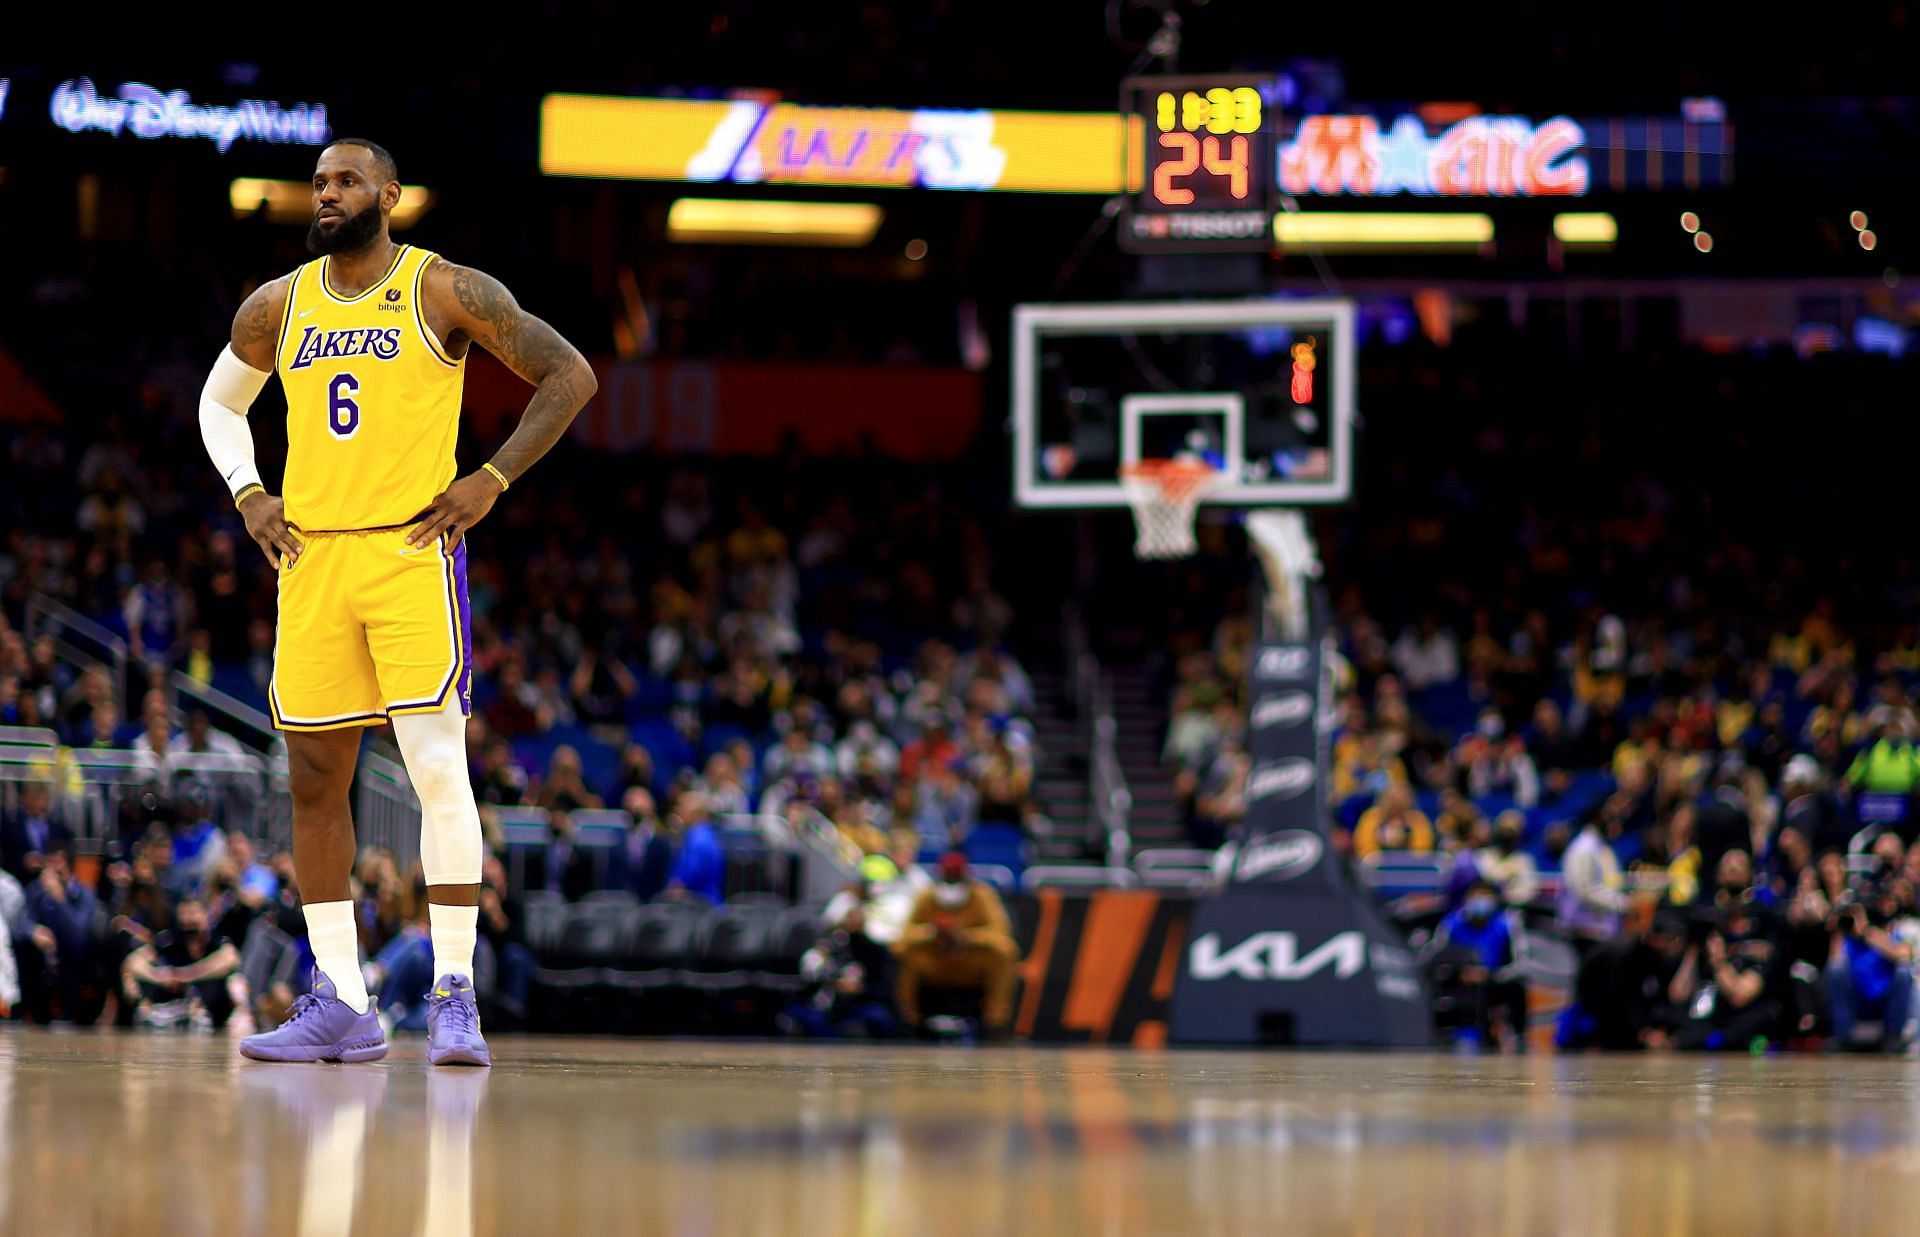 LeBron James of the LA Lakers looks on during their match against the Orlando Magic.